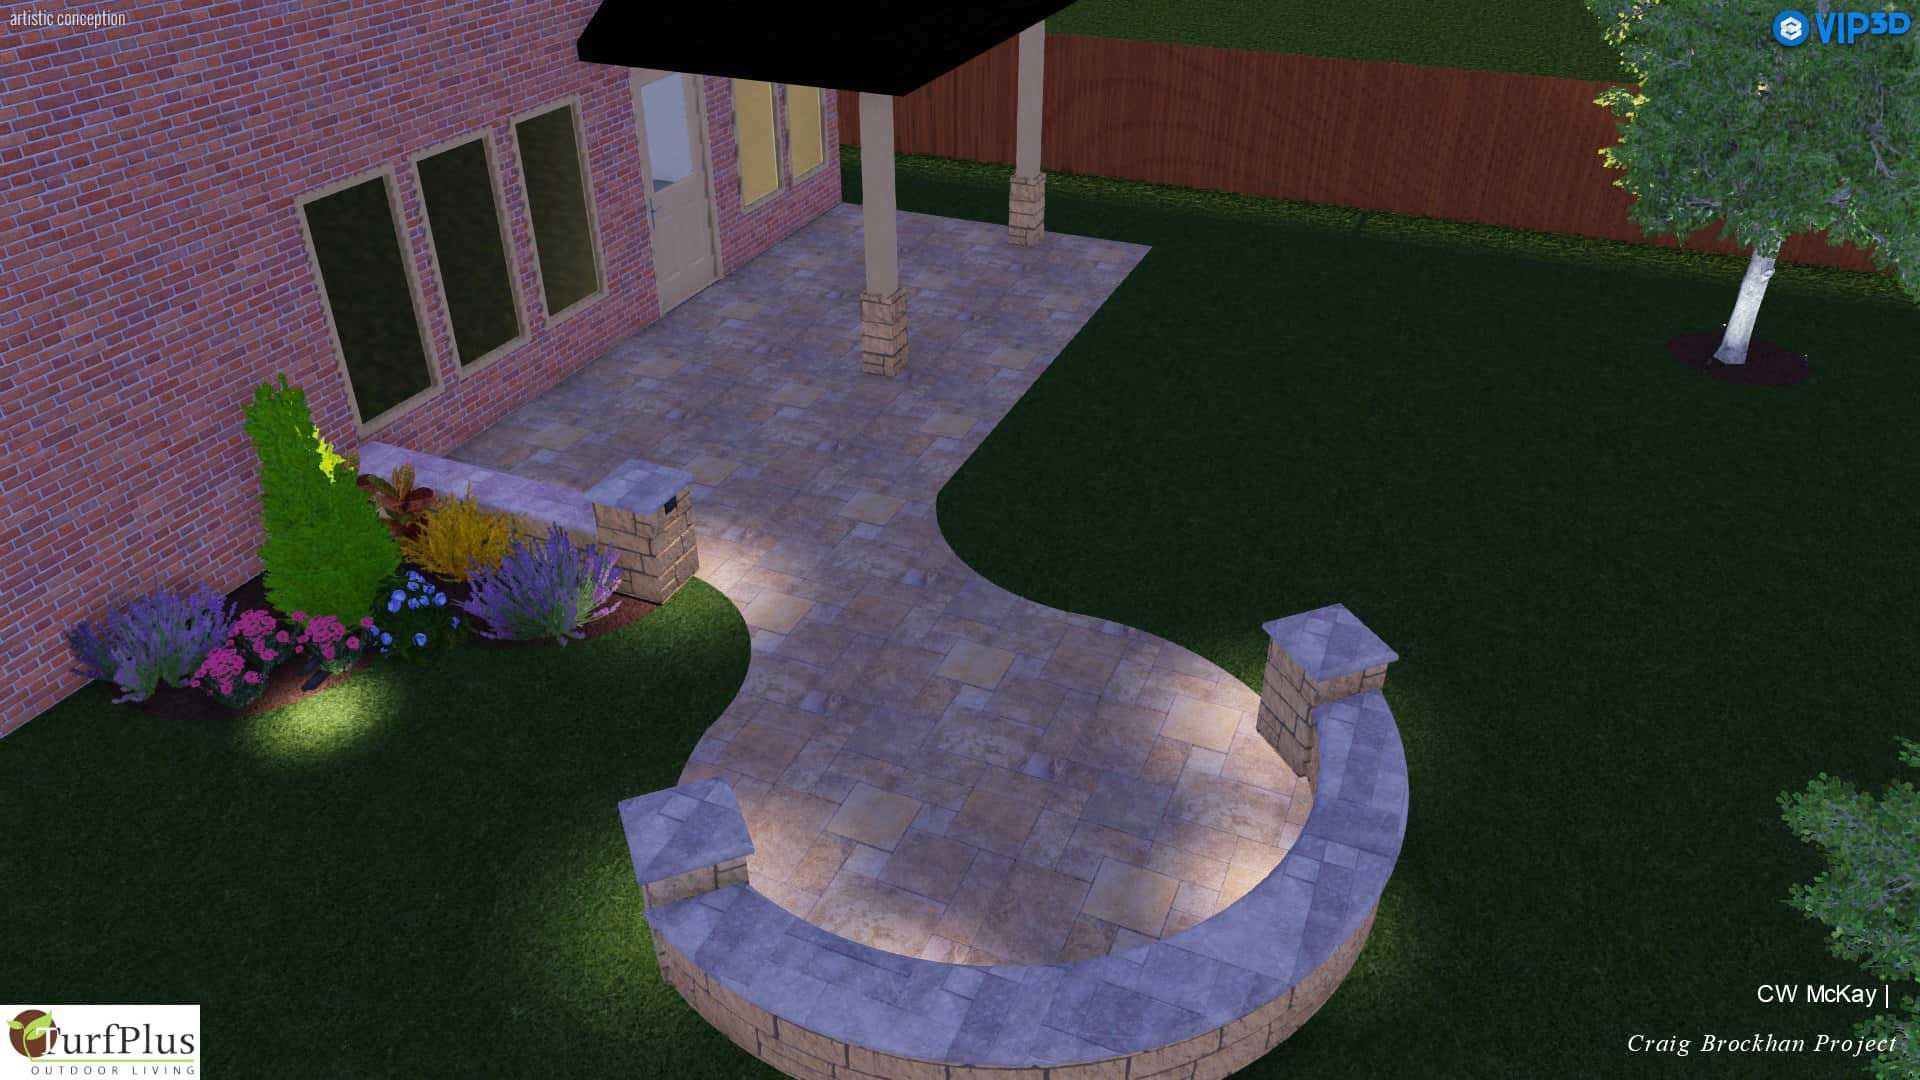 3D render paver patio and outdoor lighting design